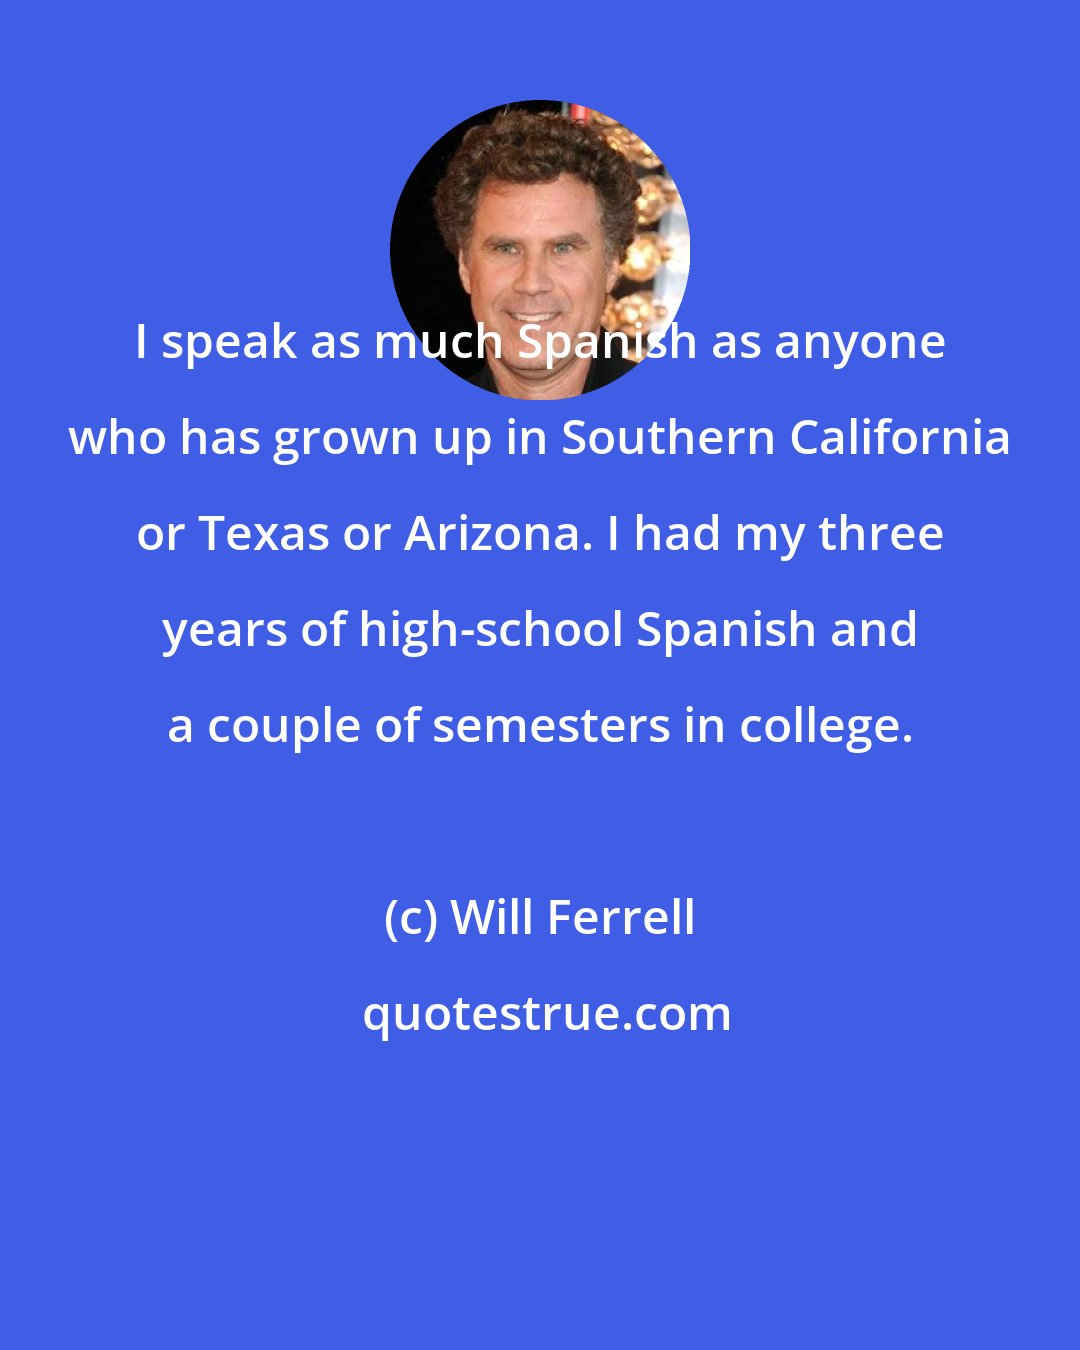 Will Ferrell: I speak as much Spanish as anyone who has grown up in Southern California or Texas or Arizona. I had my three years of high-school Spanish and a couple of semesters in college.